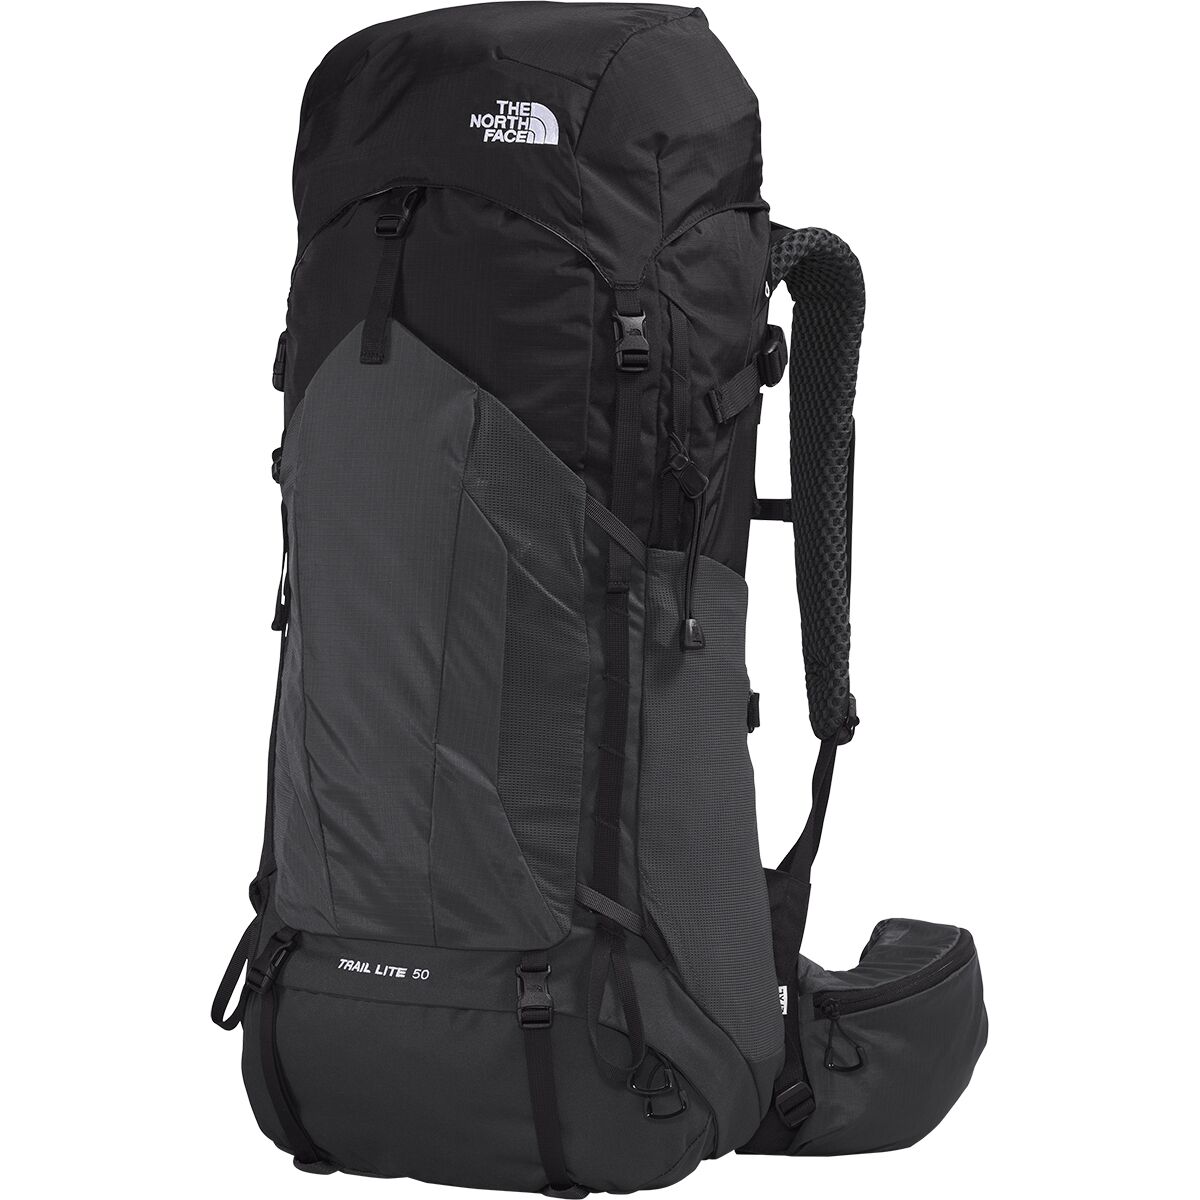 The North Face Trail Lite 50L Backpack